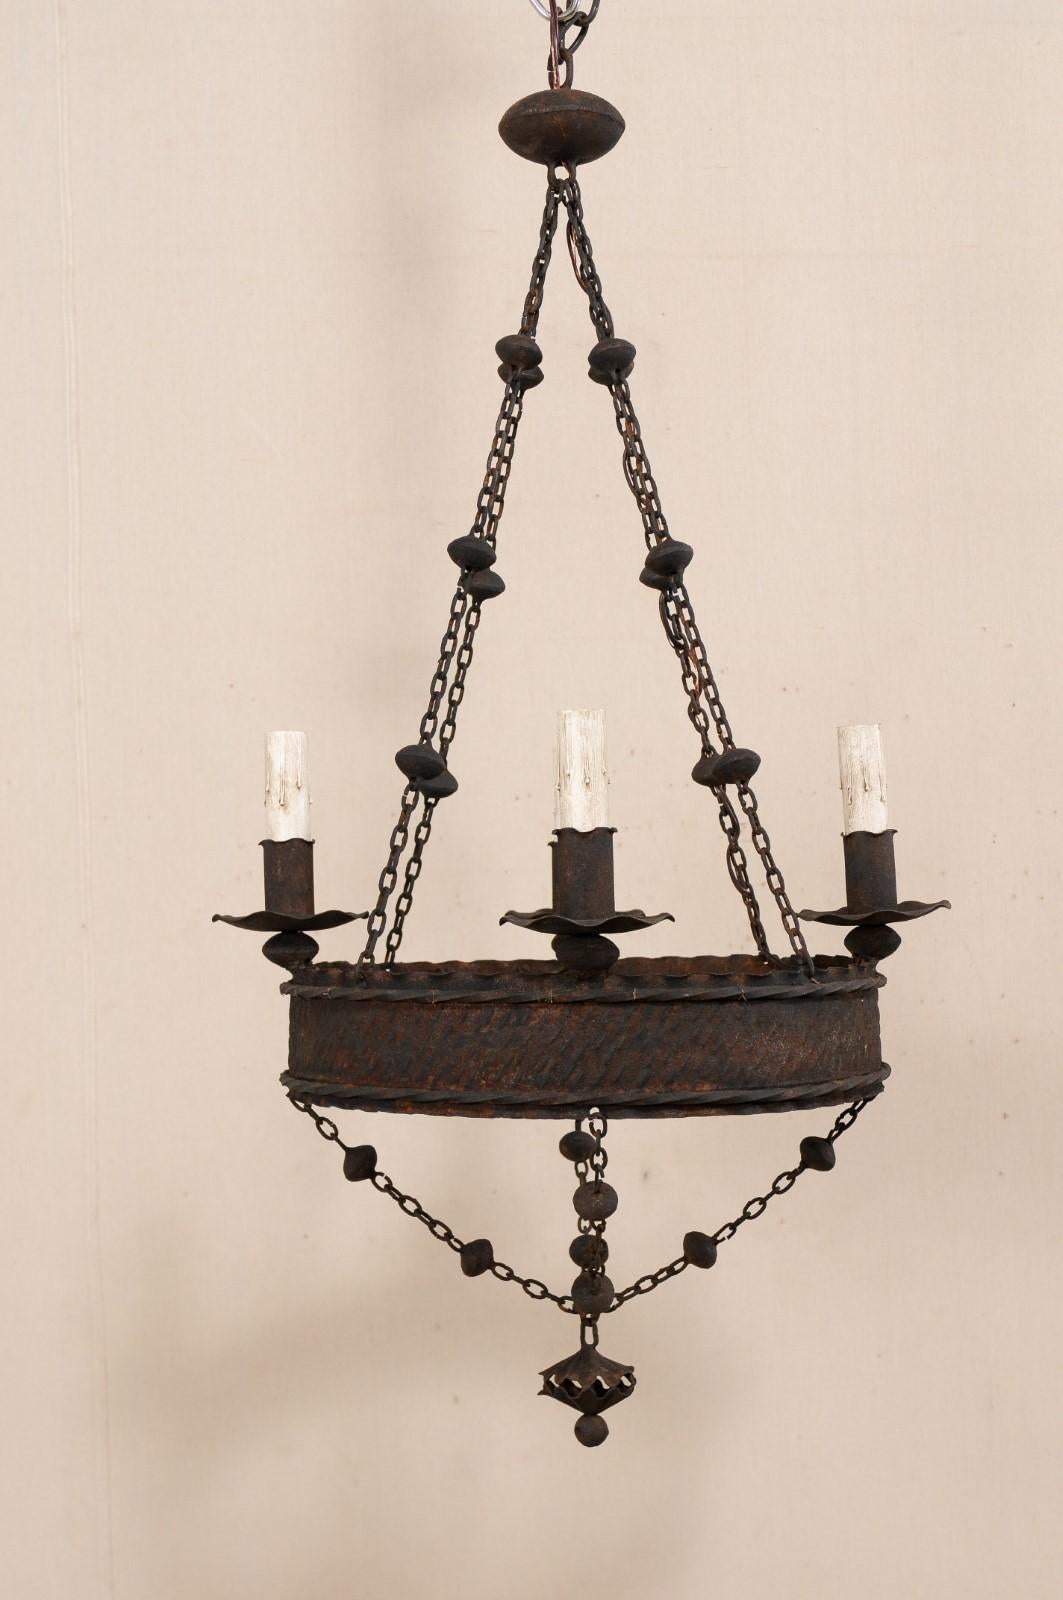 A French four-light iron ring chandelier from the mid-20th century. This vintage chandelier from France features a basket design with central hammered and nicely textured ring, adorn with ruffled edging and twisted iron accents. Four ruffled iron